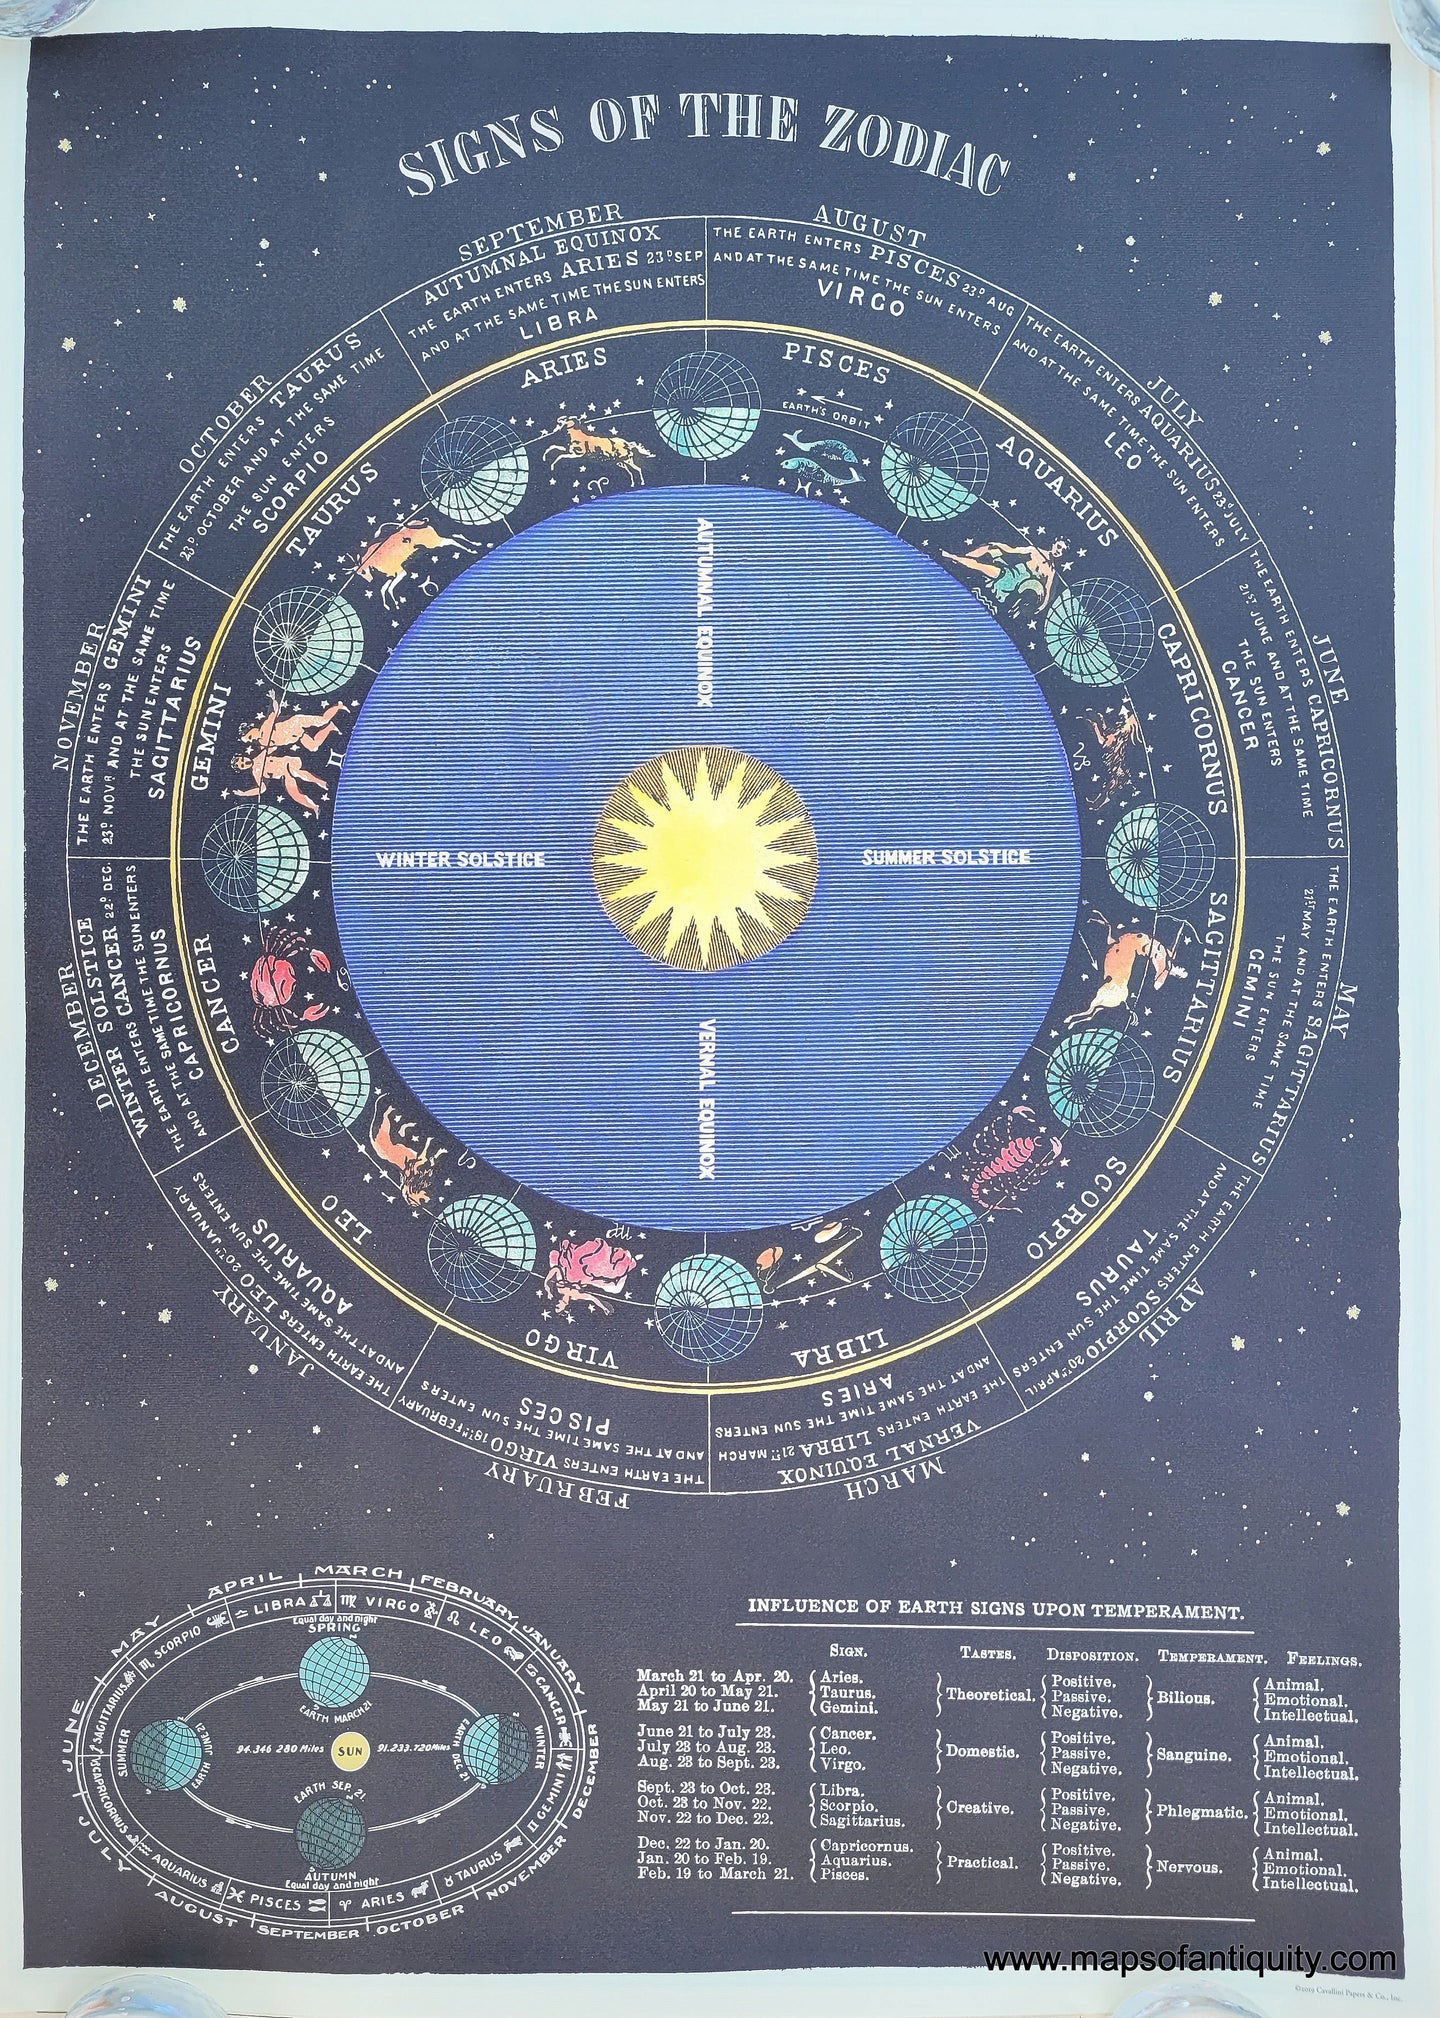 Reproduction-Signs-of-the-Zodiac---Maps-Of-Antiquity